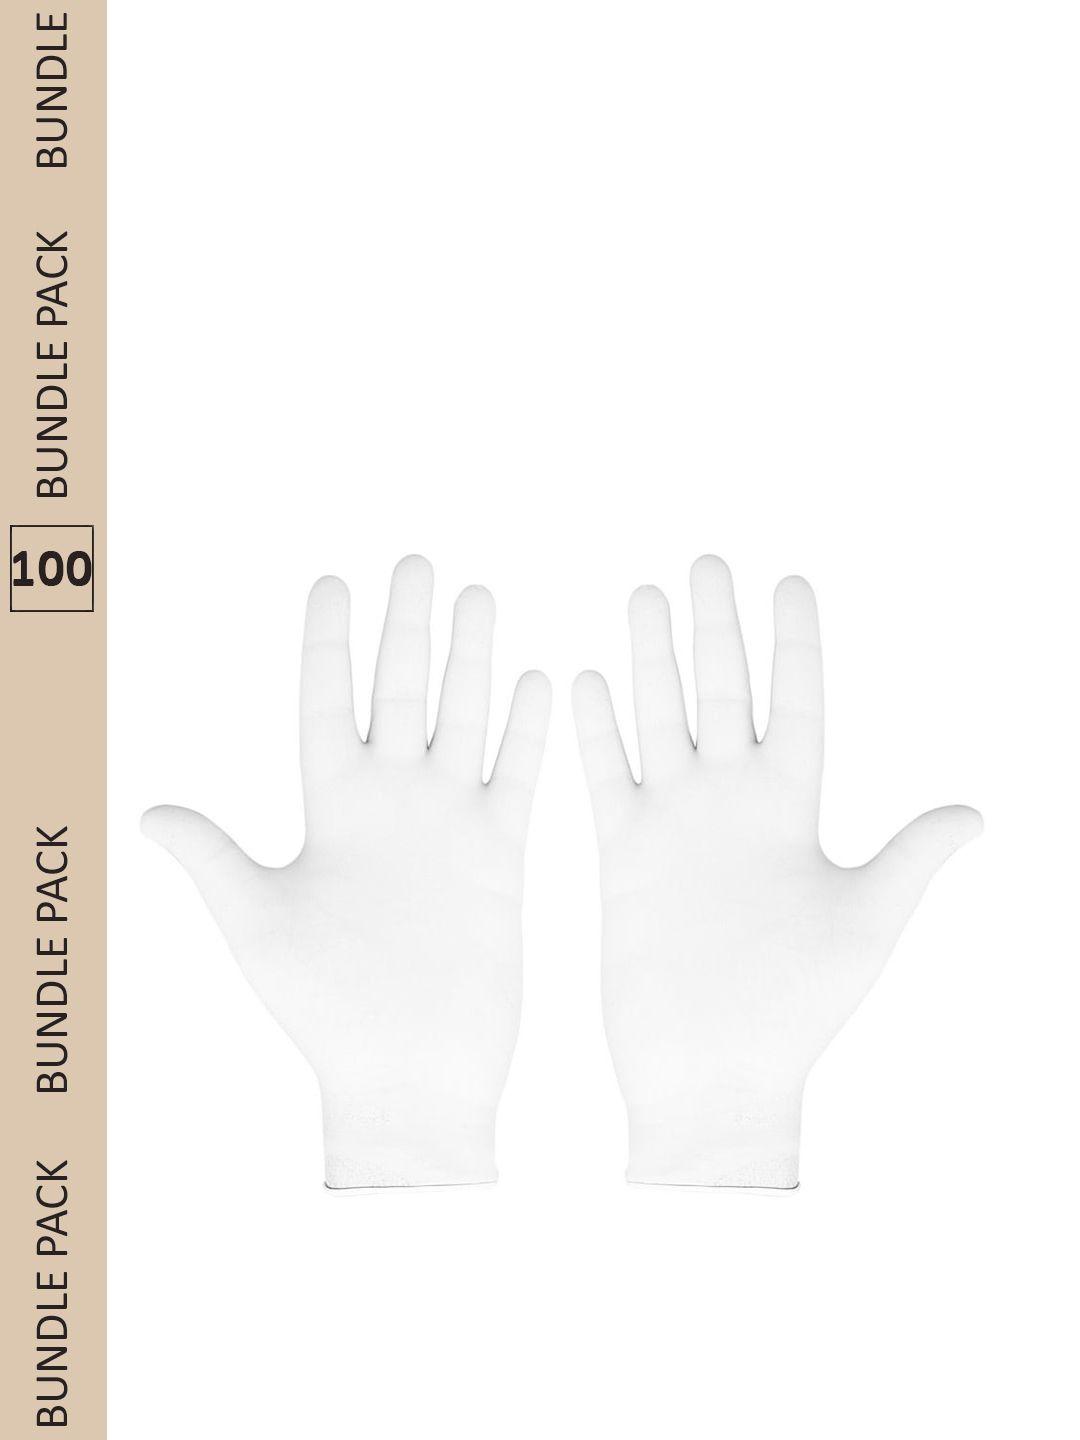 london fashion hob pack of 100 disposable hand gloves